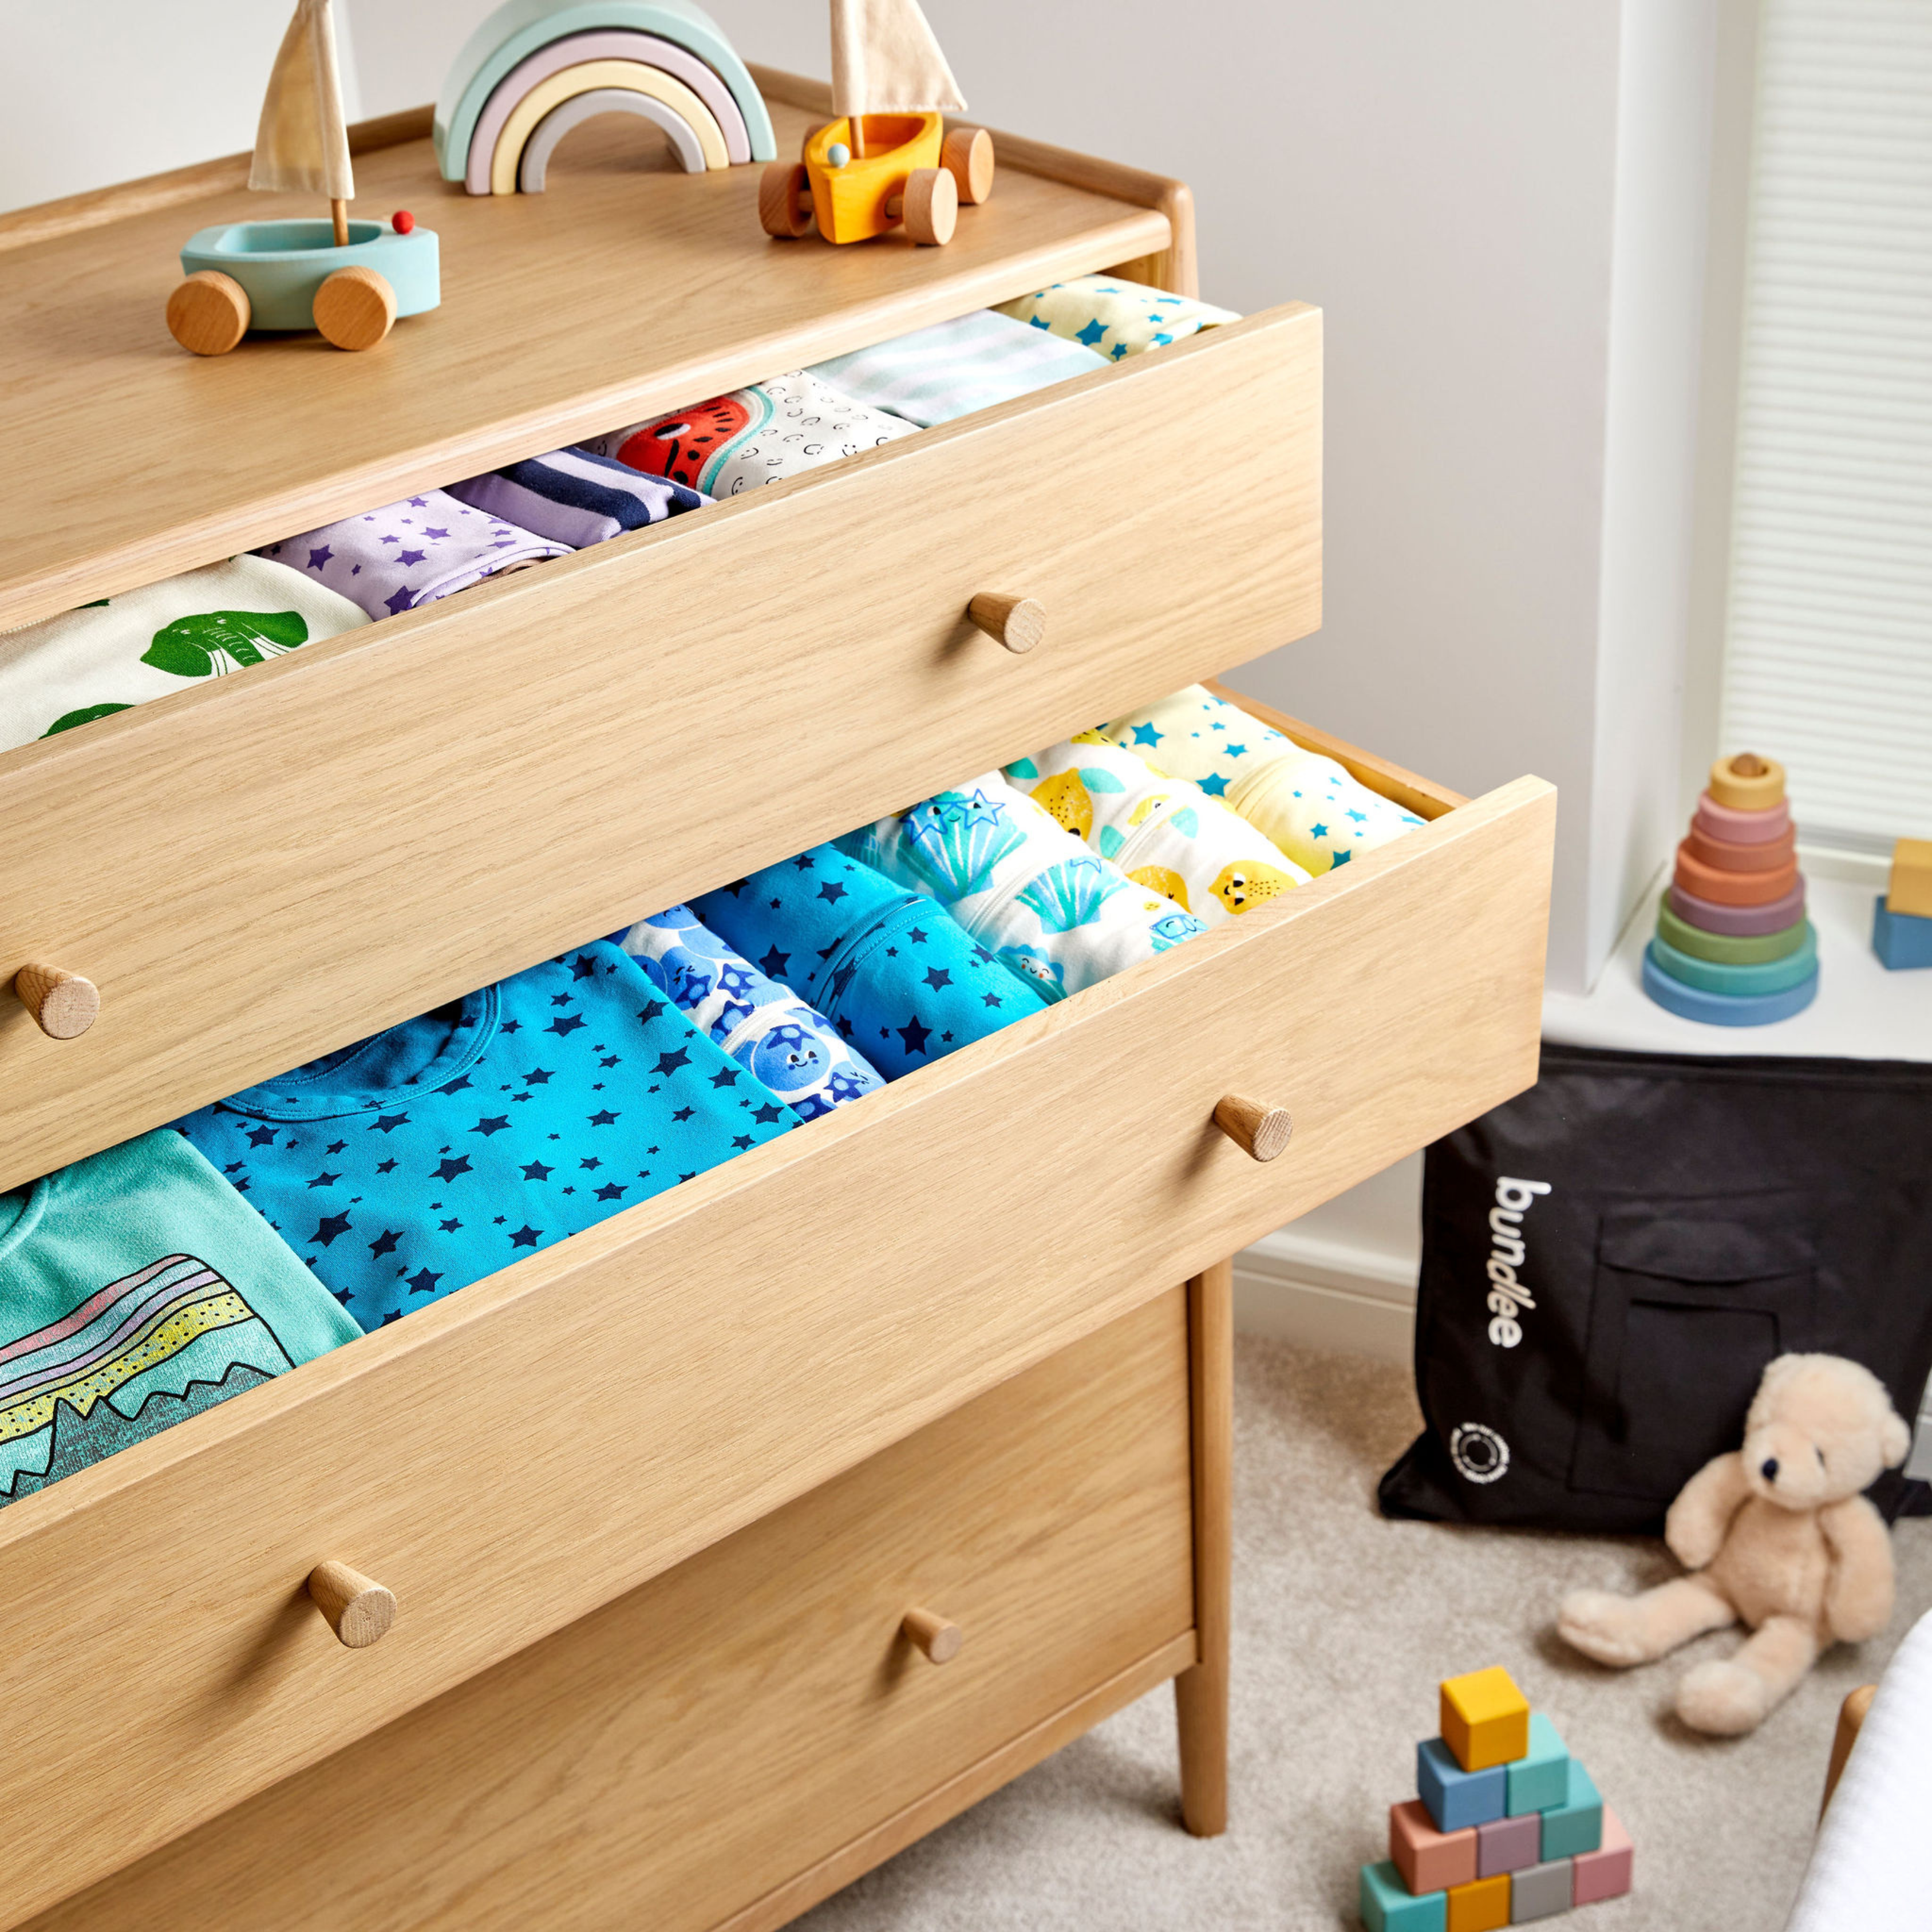 Spring cleaning baby drawers - how to save space in your baby drawers - rent baby clothes